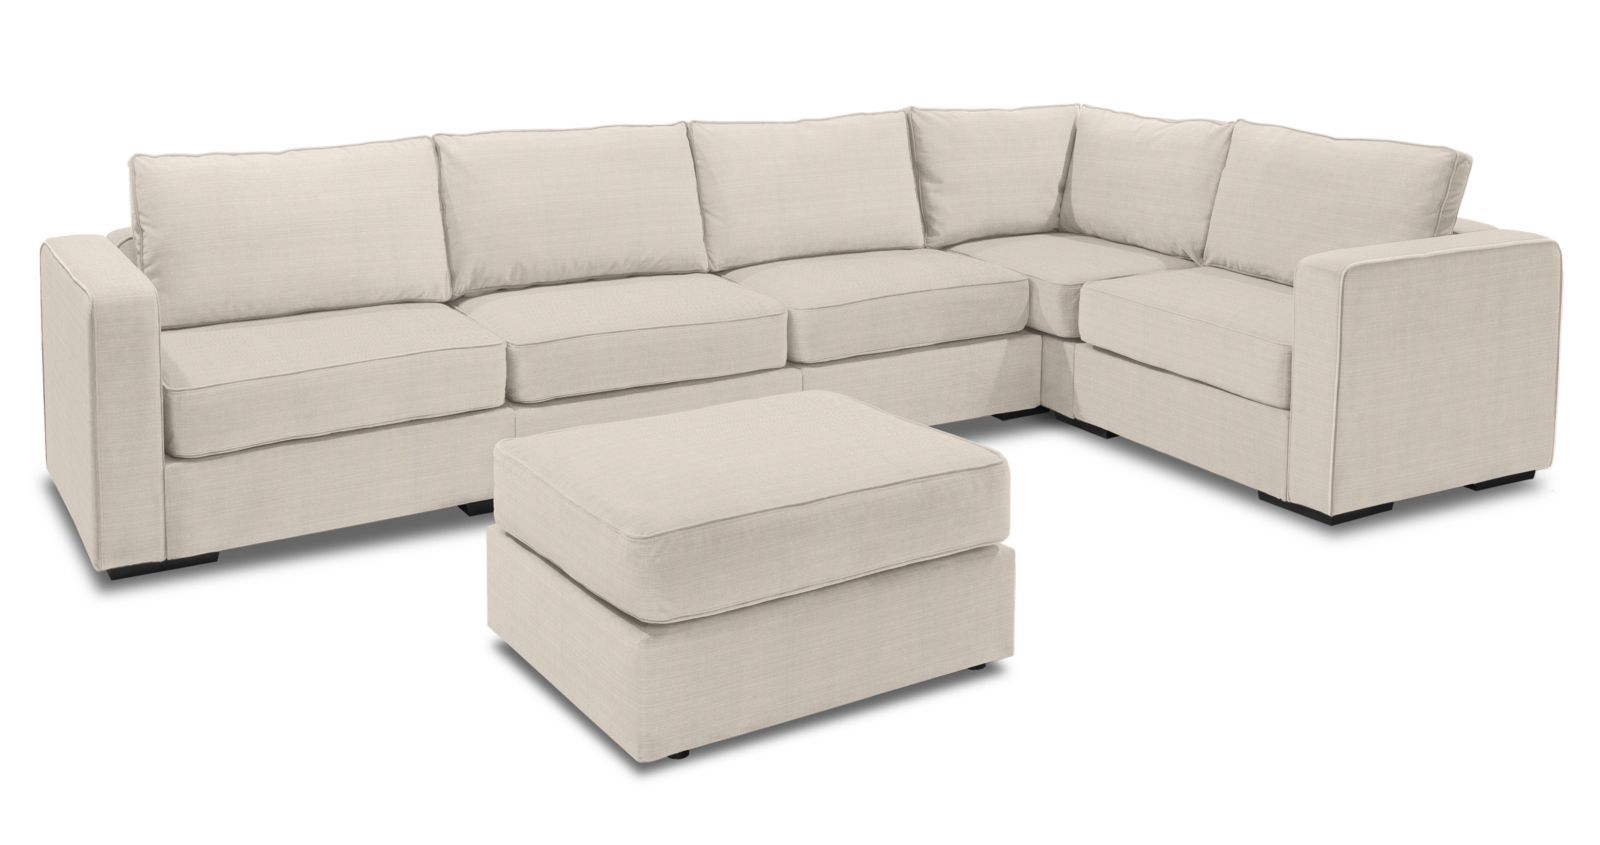 Large Chaise Sectional Sofa with Ottoman | The Lovesac Company